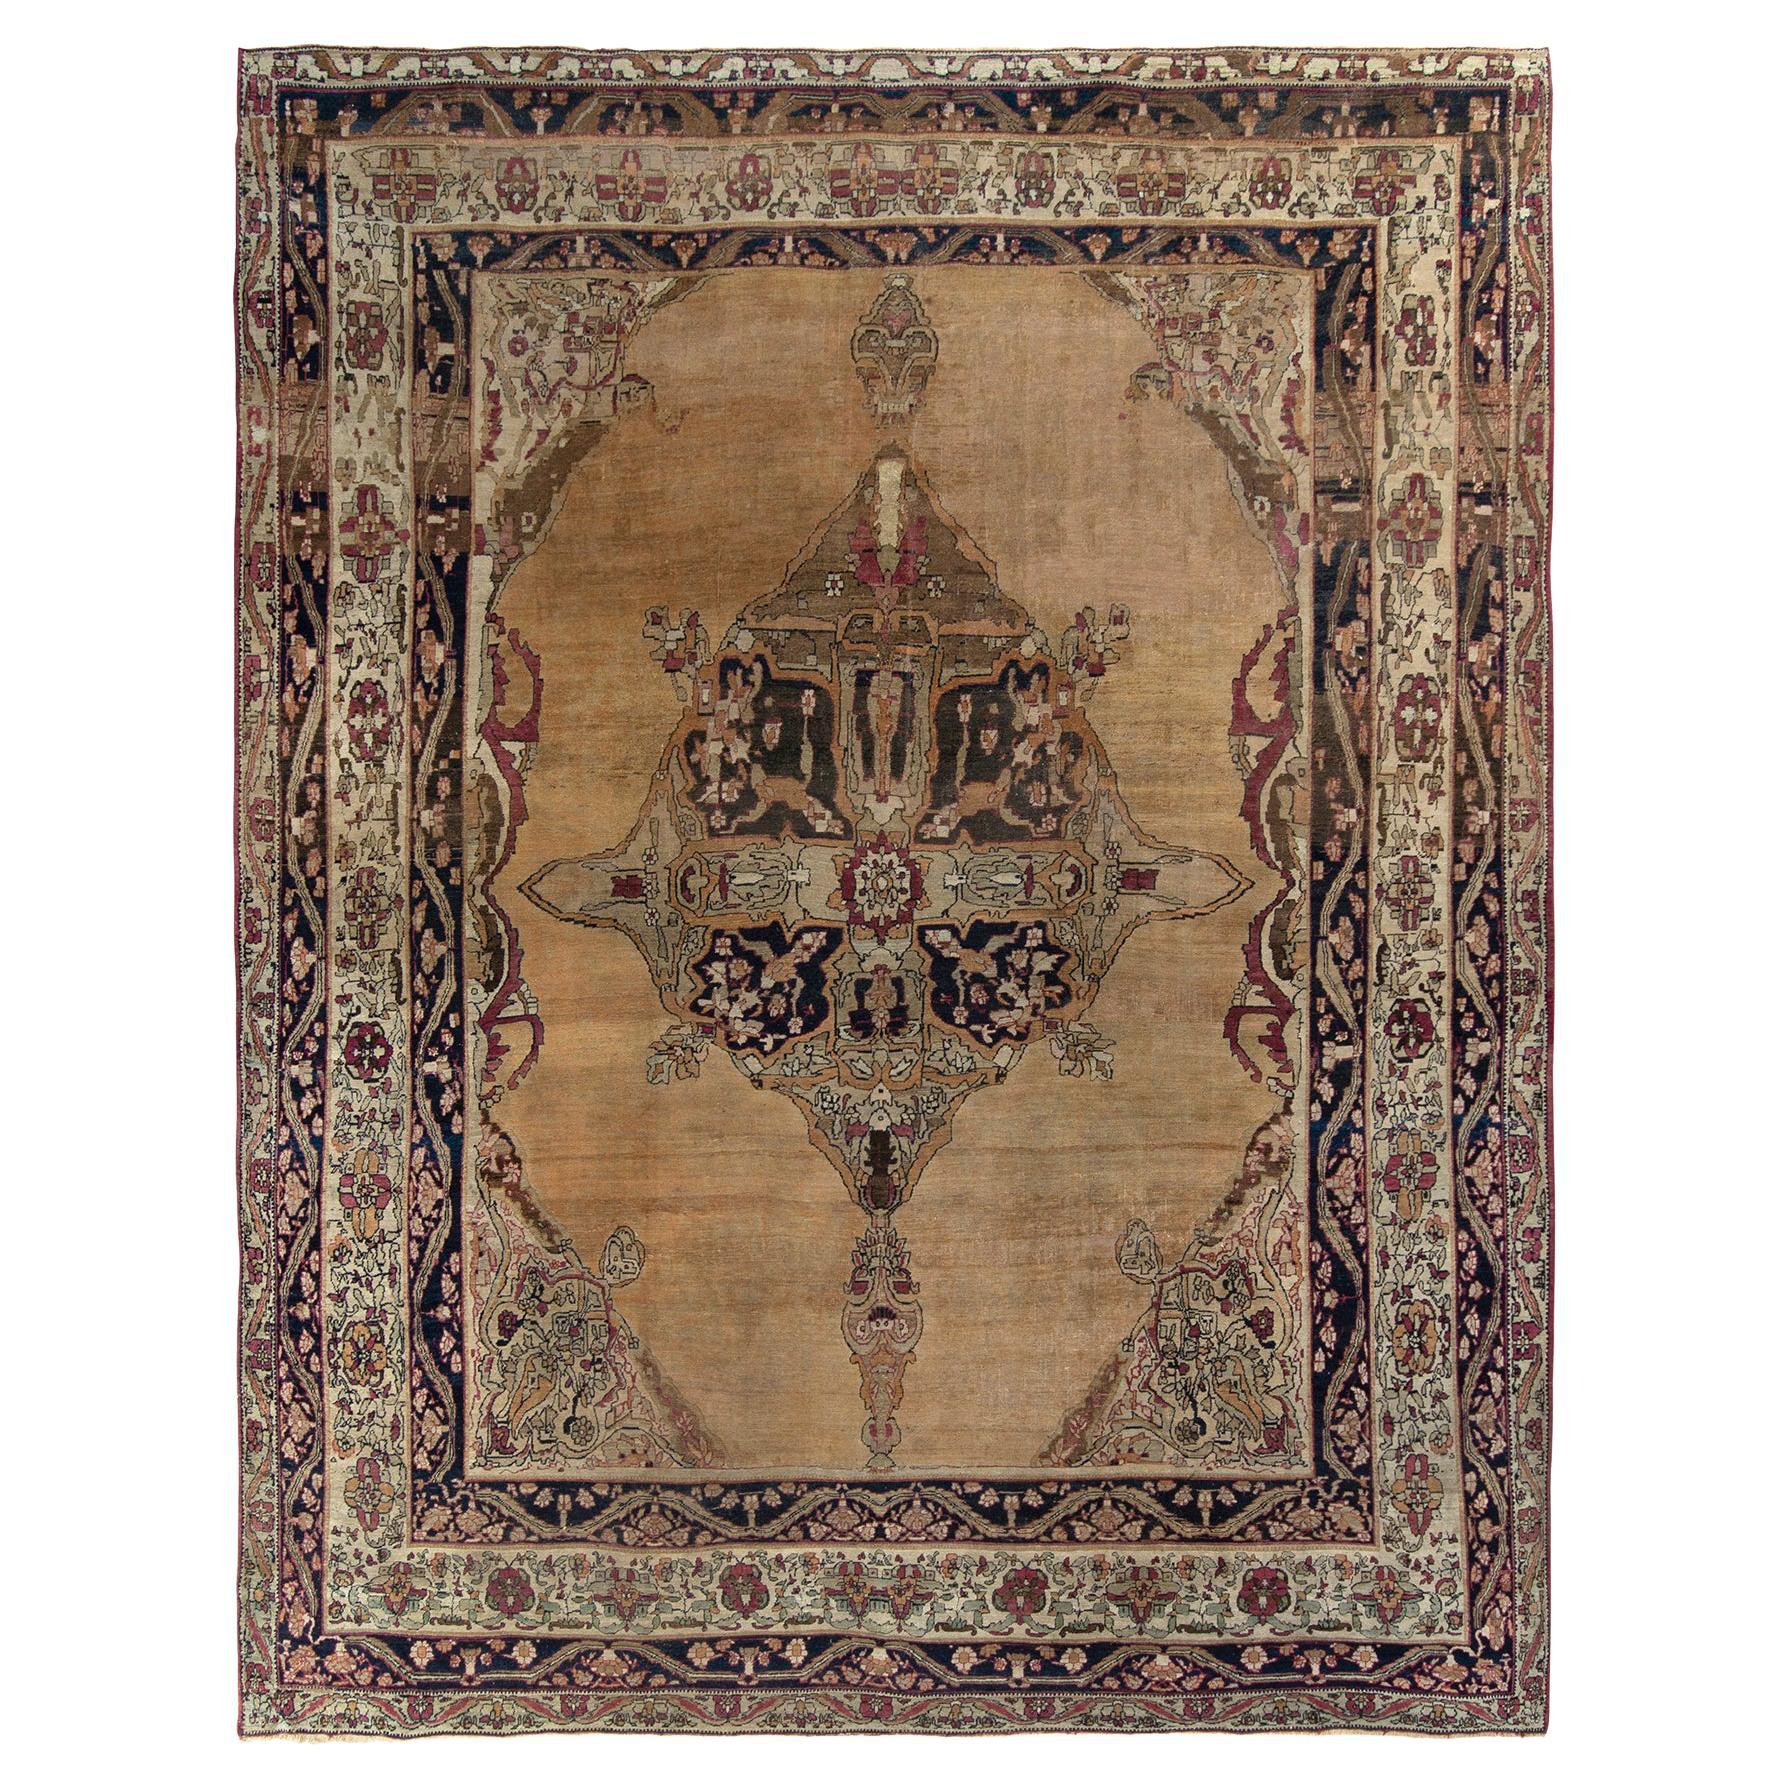 Hand-Knotted Antique Persian Rug in Beige-Brown Medallion Pattern